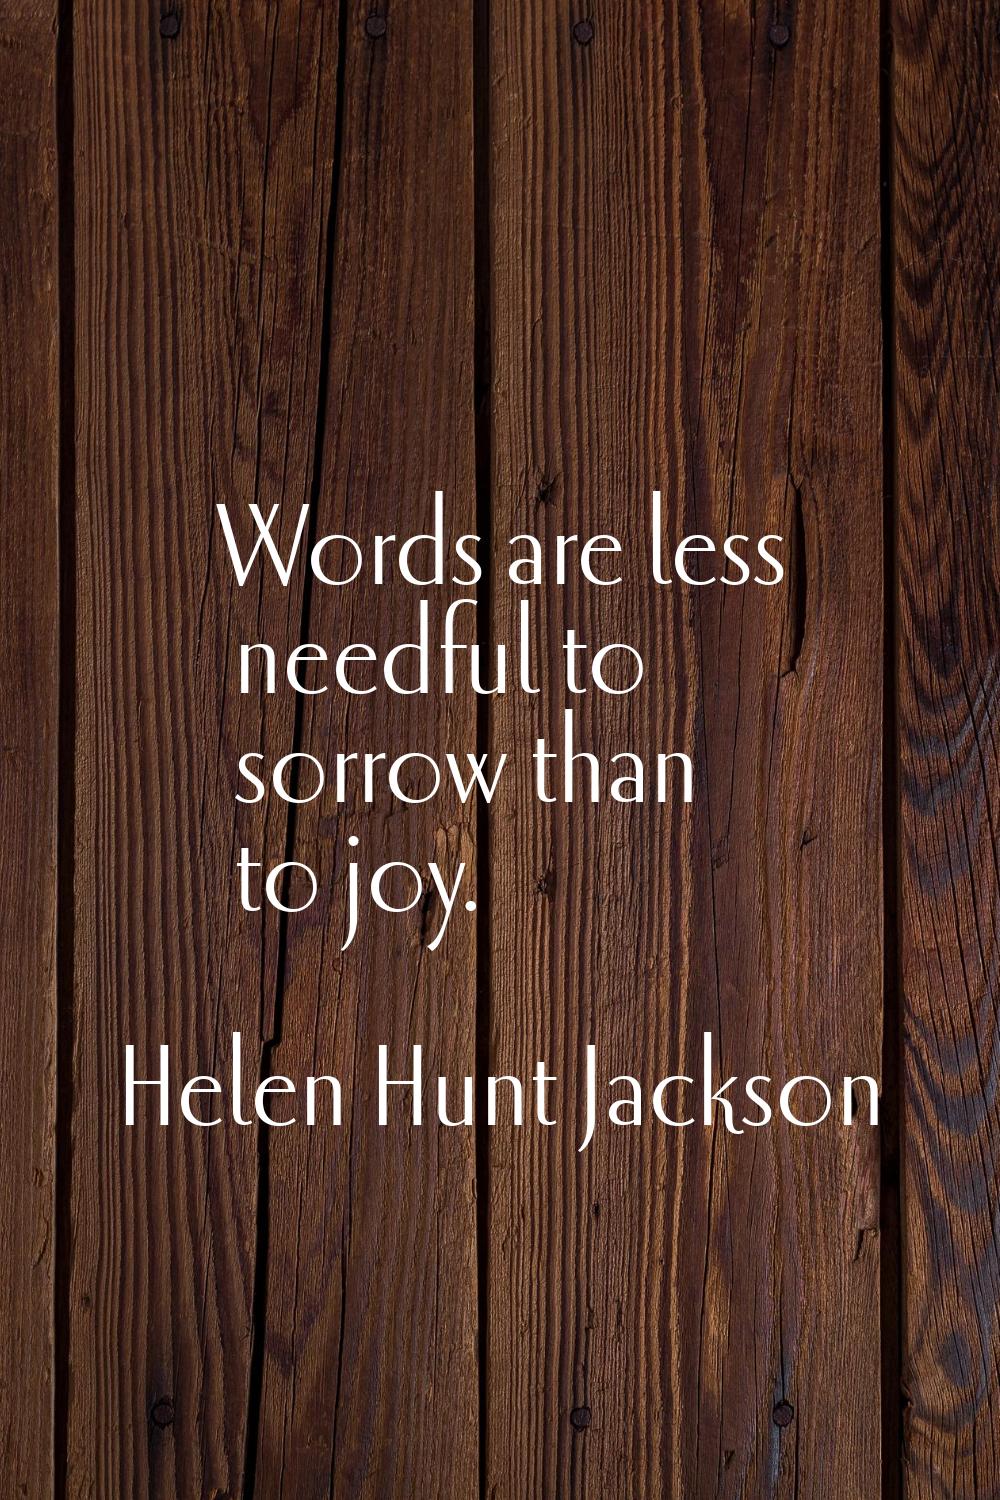 Words are less needful to sorrow than to joy.